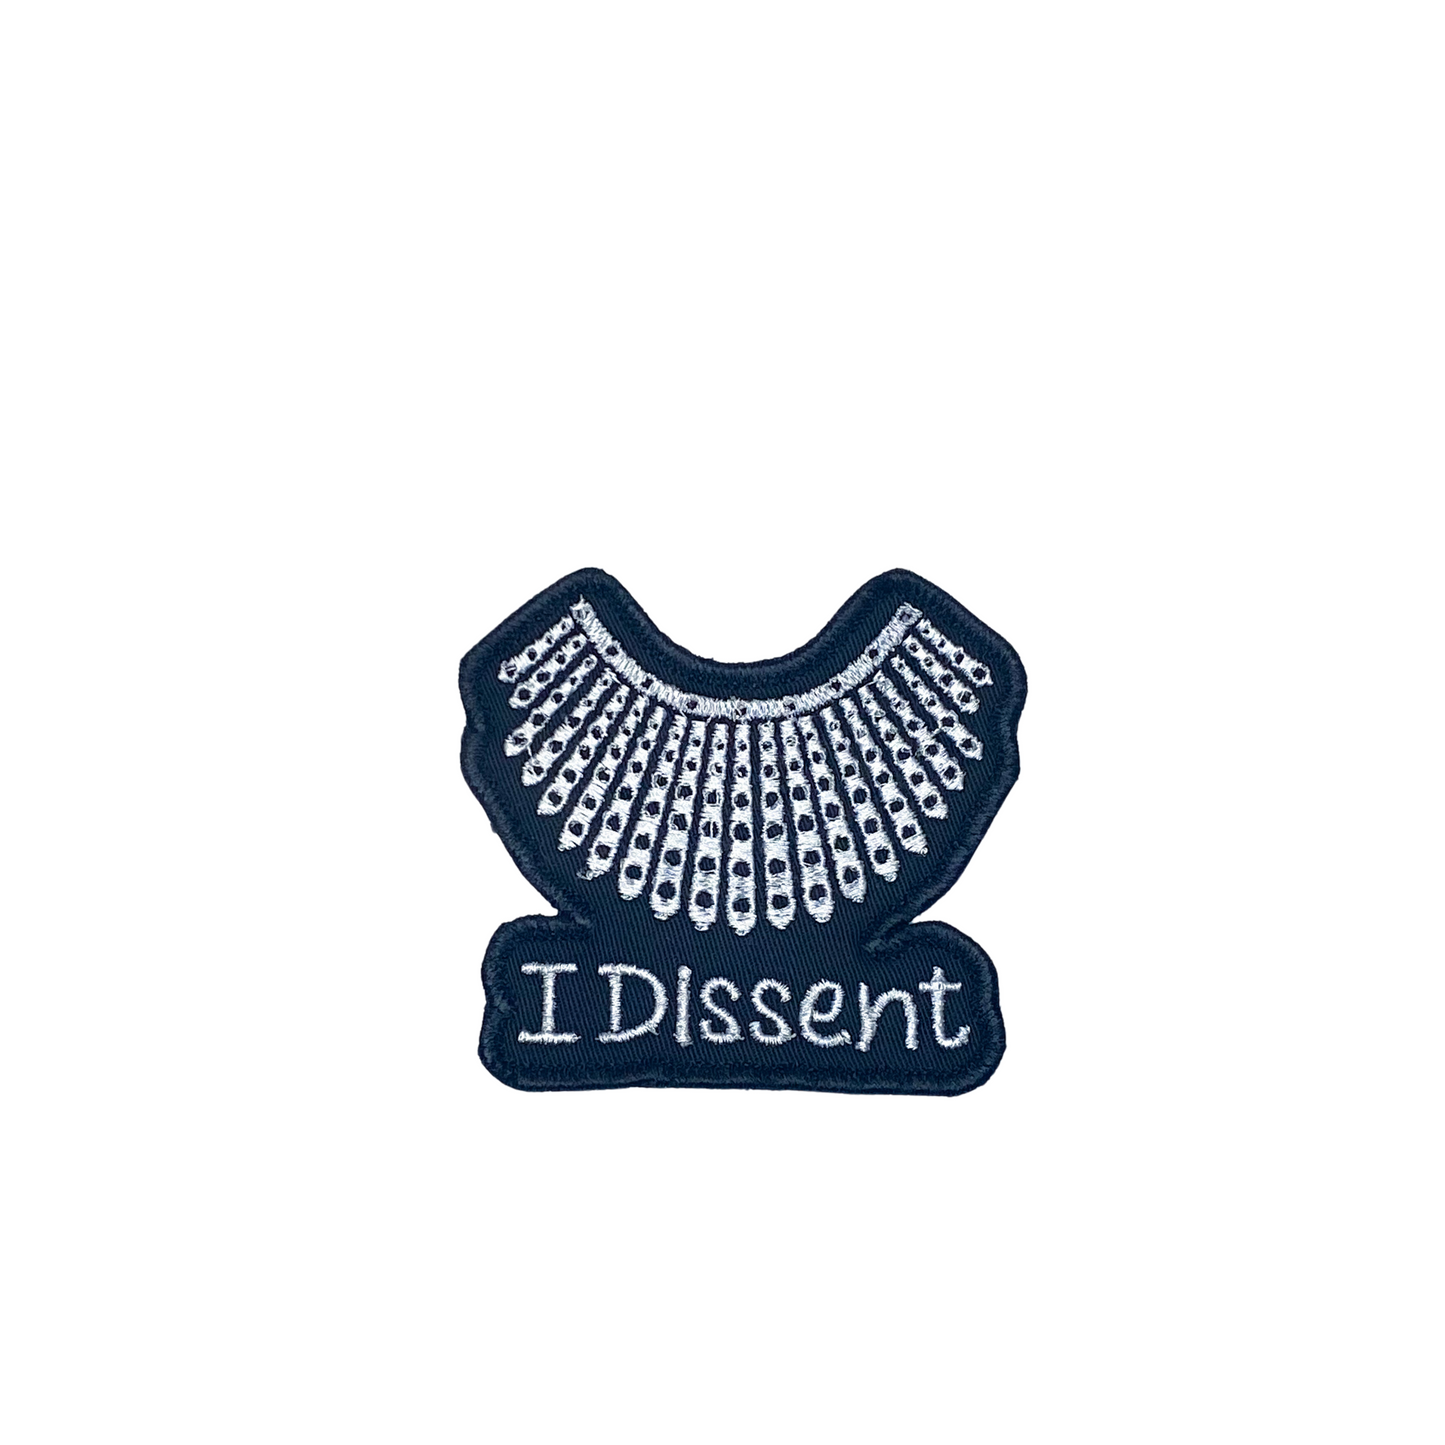 I Dissent Patch - Embroidery